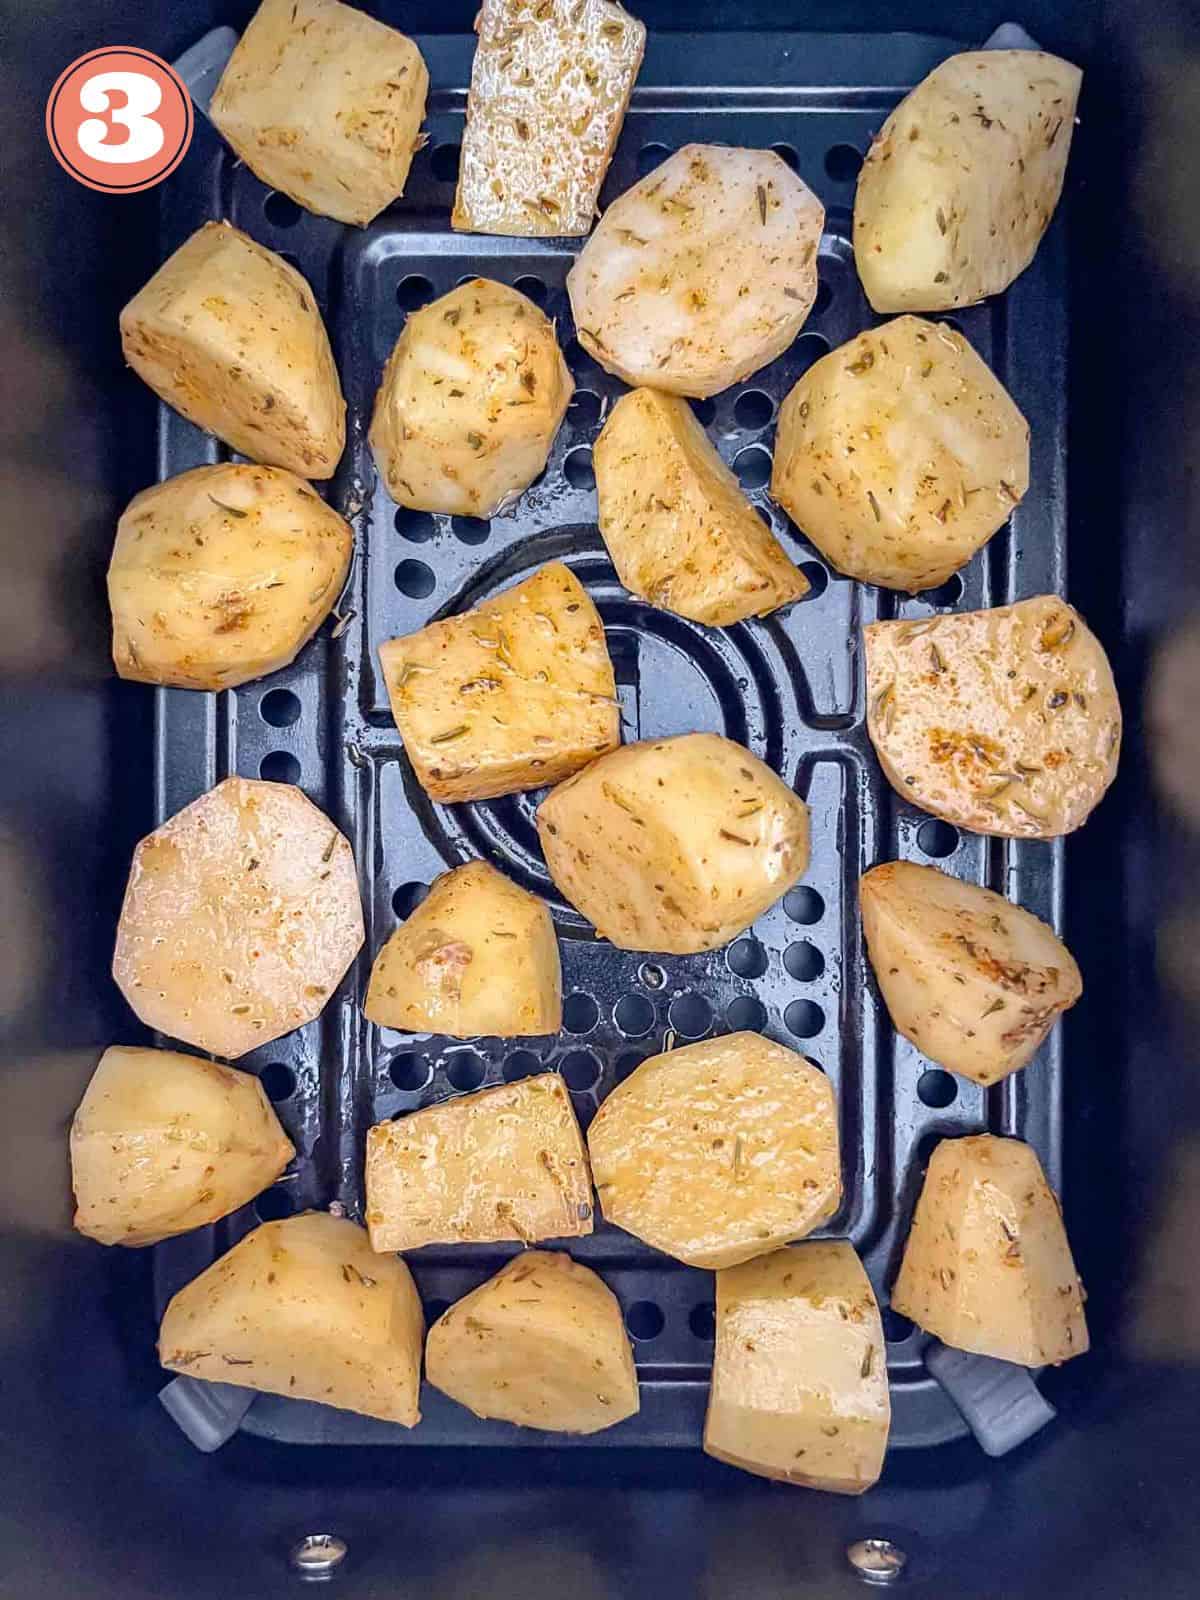 potato cubes in an air fryer basket labelled number three.